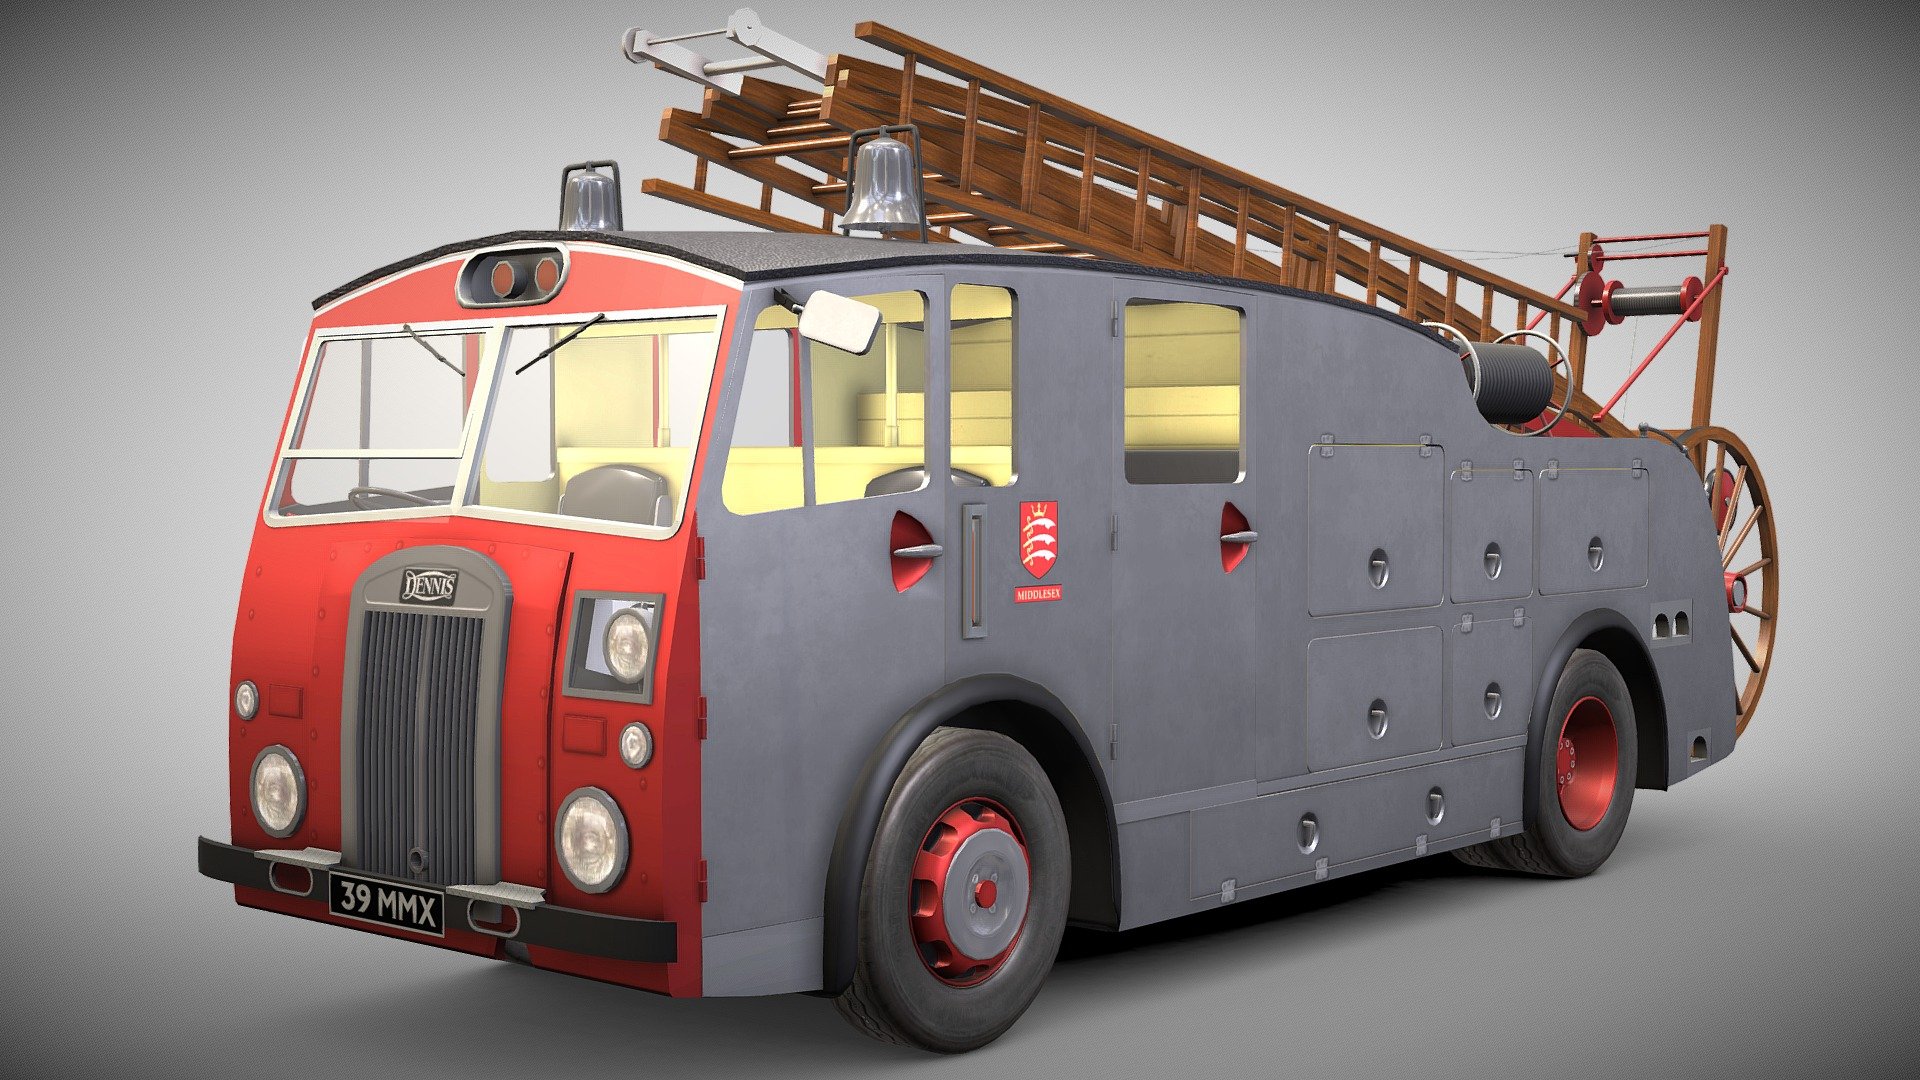 A Middlesex Fire Brigade version of this Dennis F12 fire engine. The county was the best customer of this class of appliances with 21 of them being put into service.



About this model:

Game-quality, simplified and not 100% accurate compare to it’s reallife counterpart, this 3D model is suitable for use in smaller projects or as a background prop.

Turbosquid version can be found here with more variations:
https://www.turbo squid.com/3d-models/3d-model-dennis-f12-fire-engine-2127954 (no space) - Dennis F12 - Middlesex ver 3d model